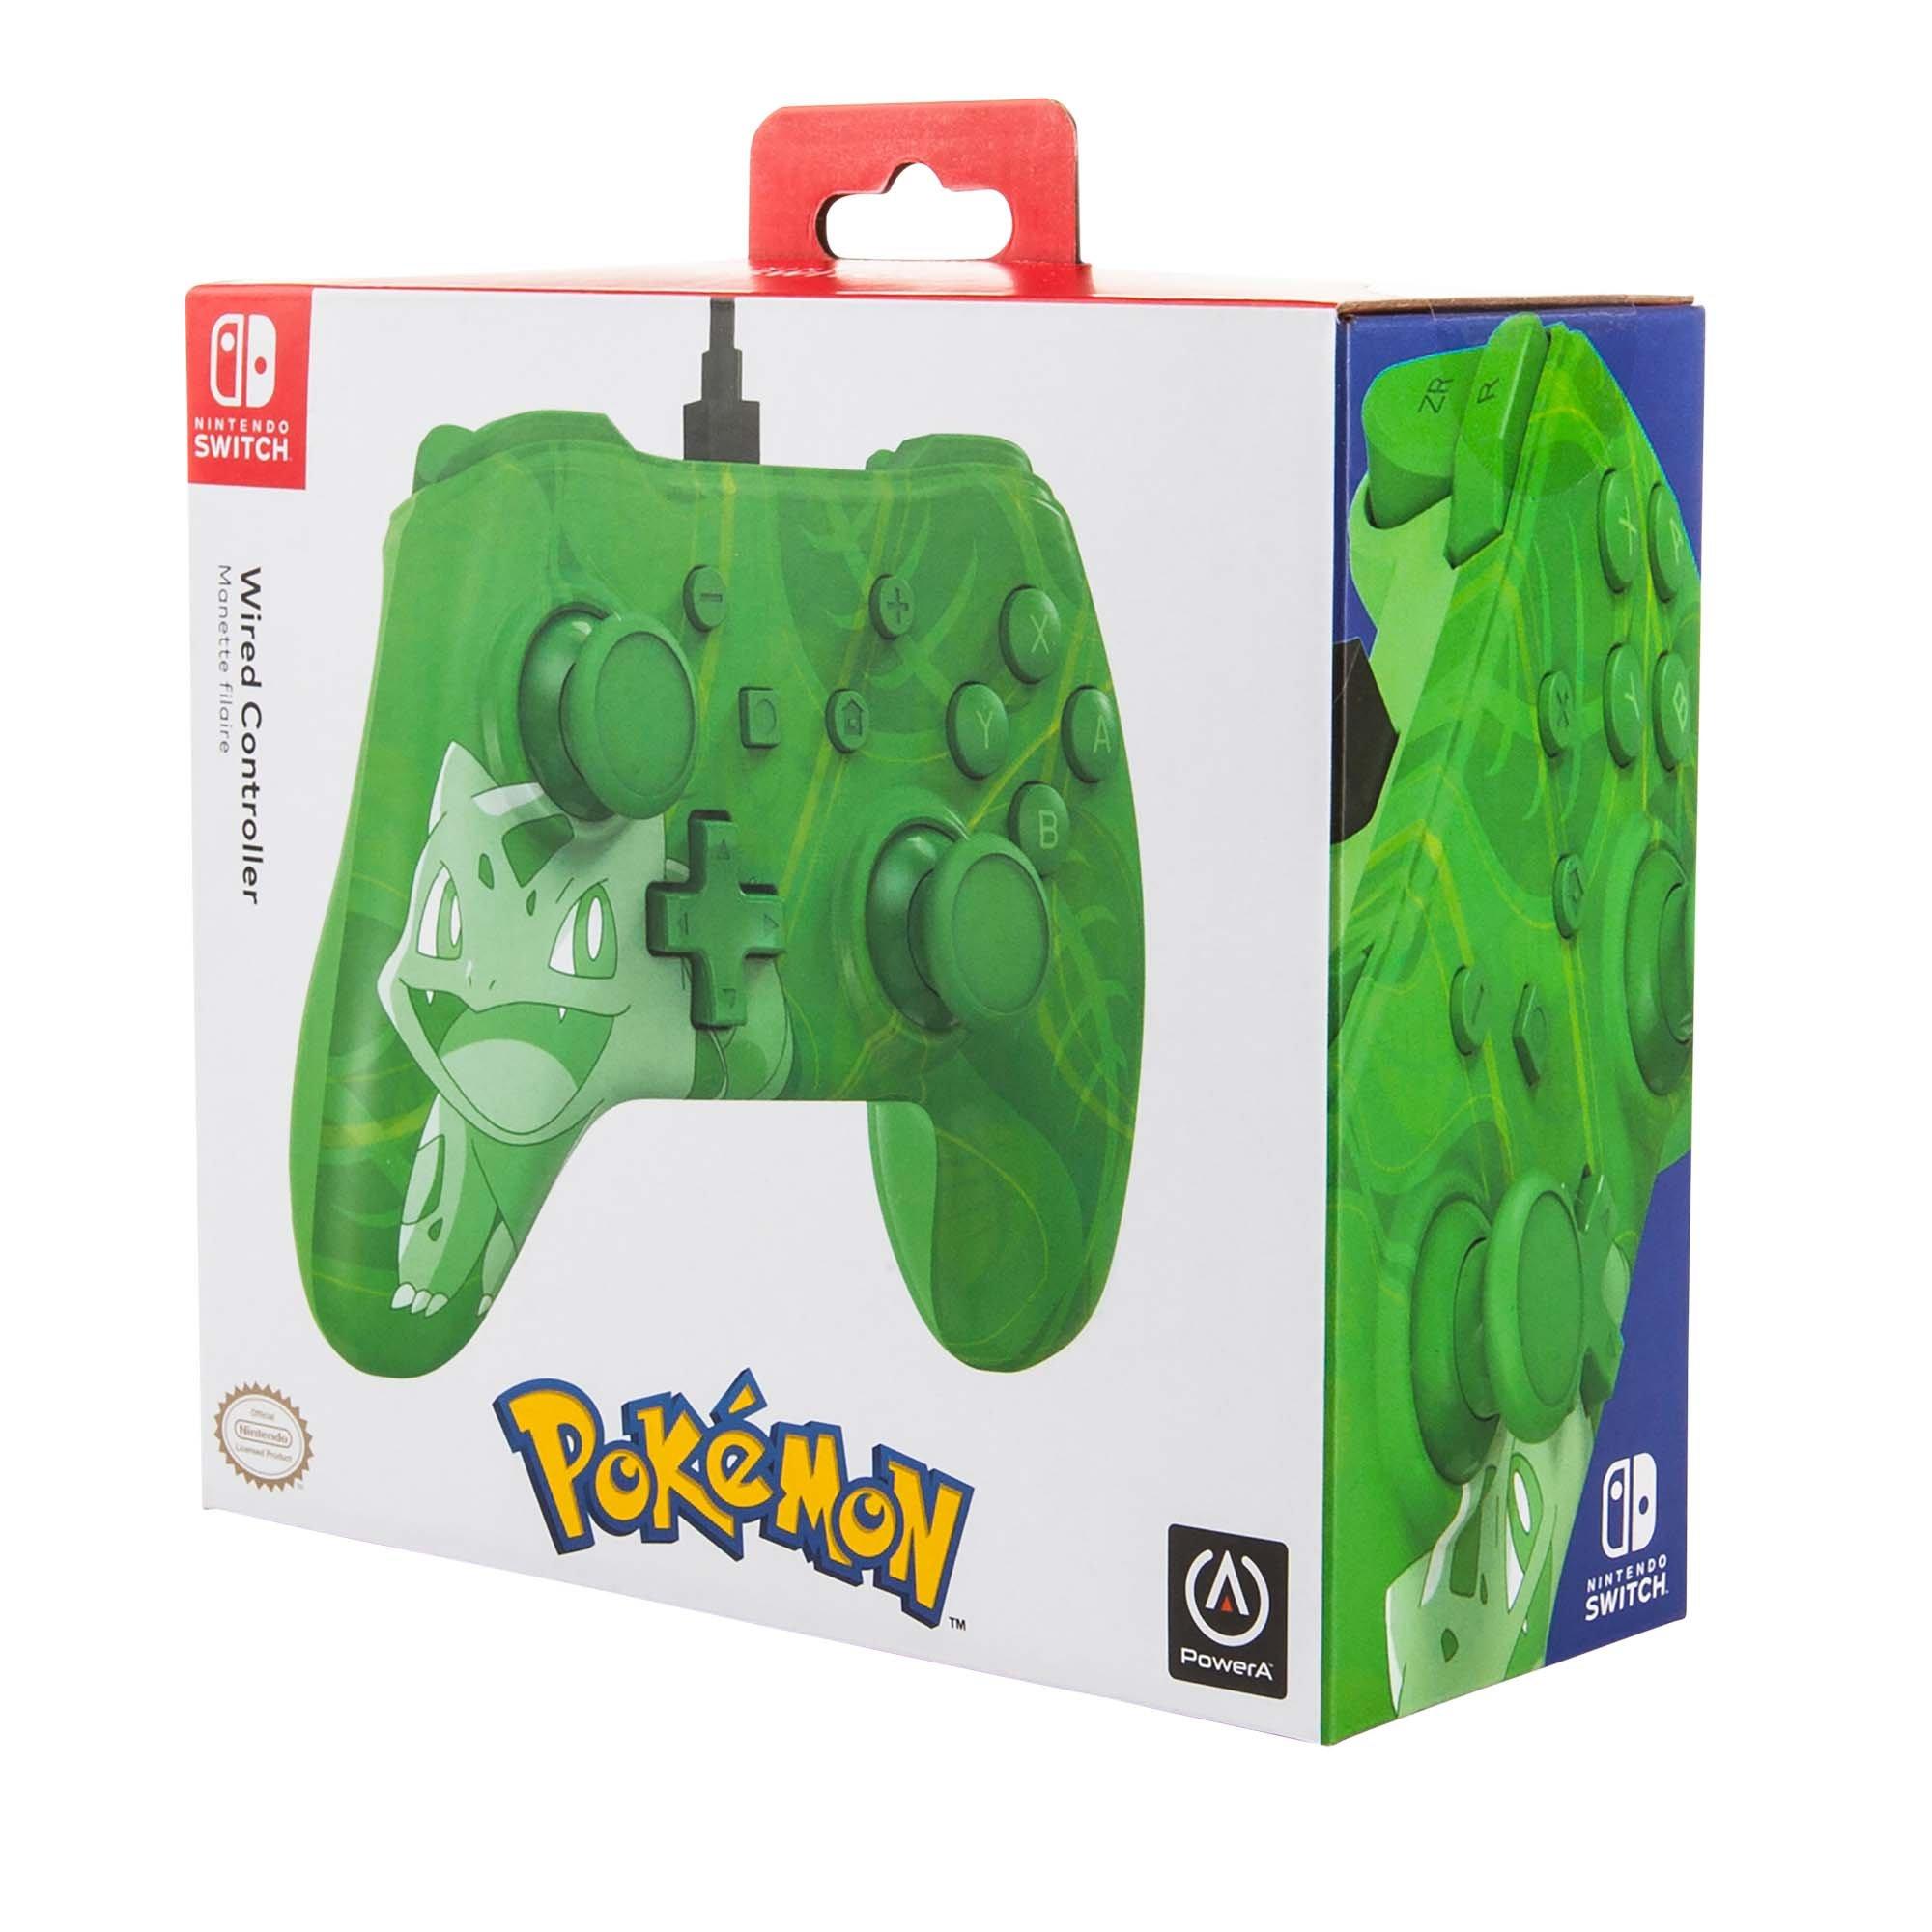  PowerA Wired Controller for Nintendo Switch - Pokémon: Bulbasaur  Overgrow, Gamepad, Game controller, Wired controller, Officially licensed :  Video Games